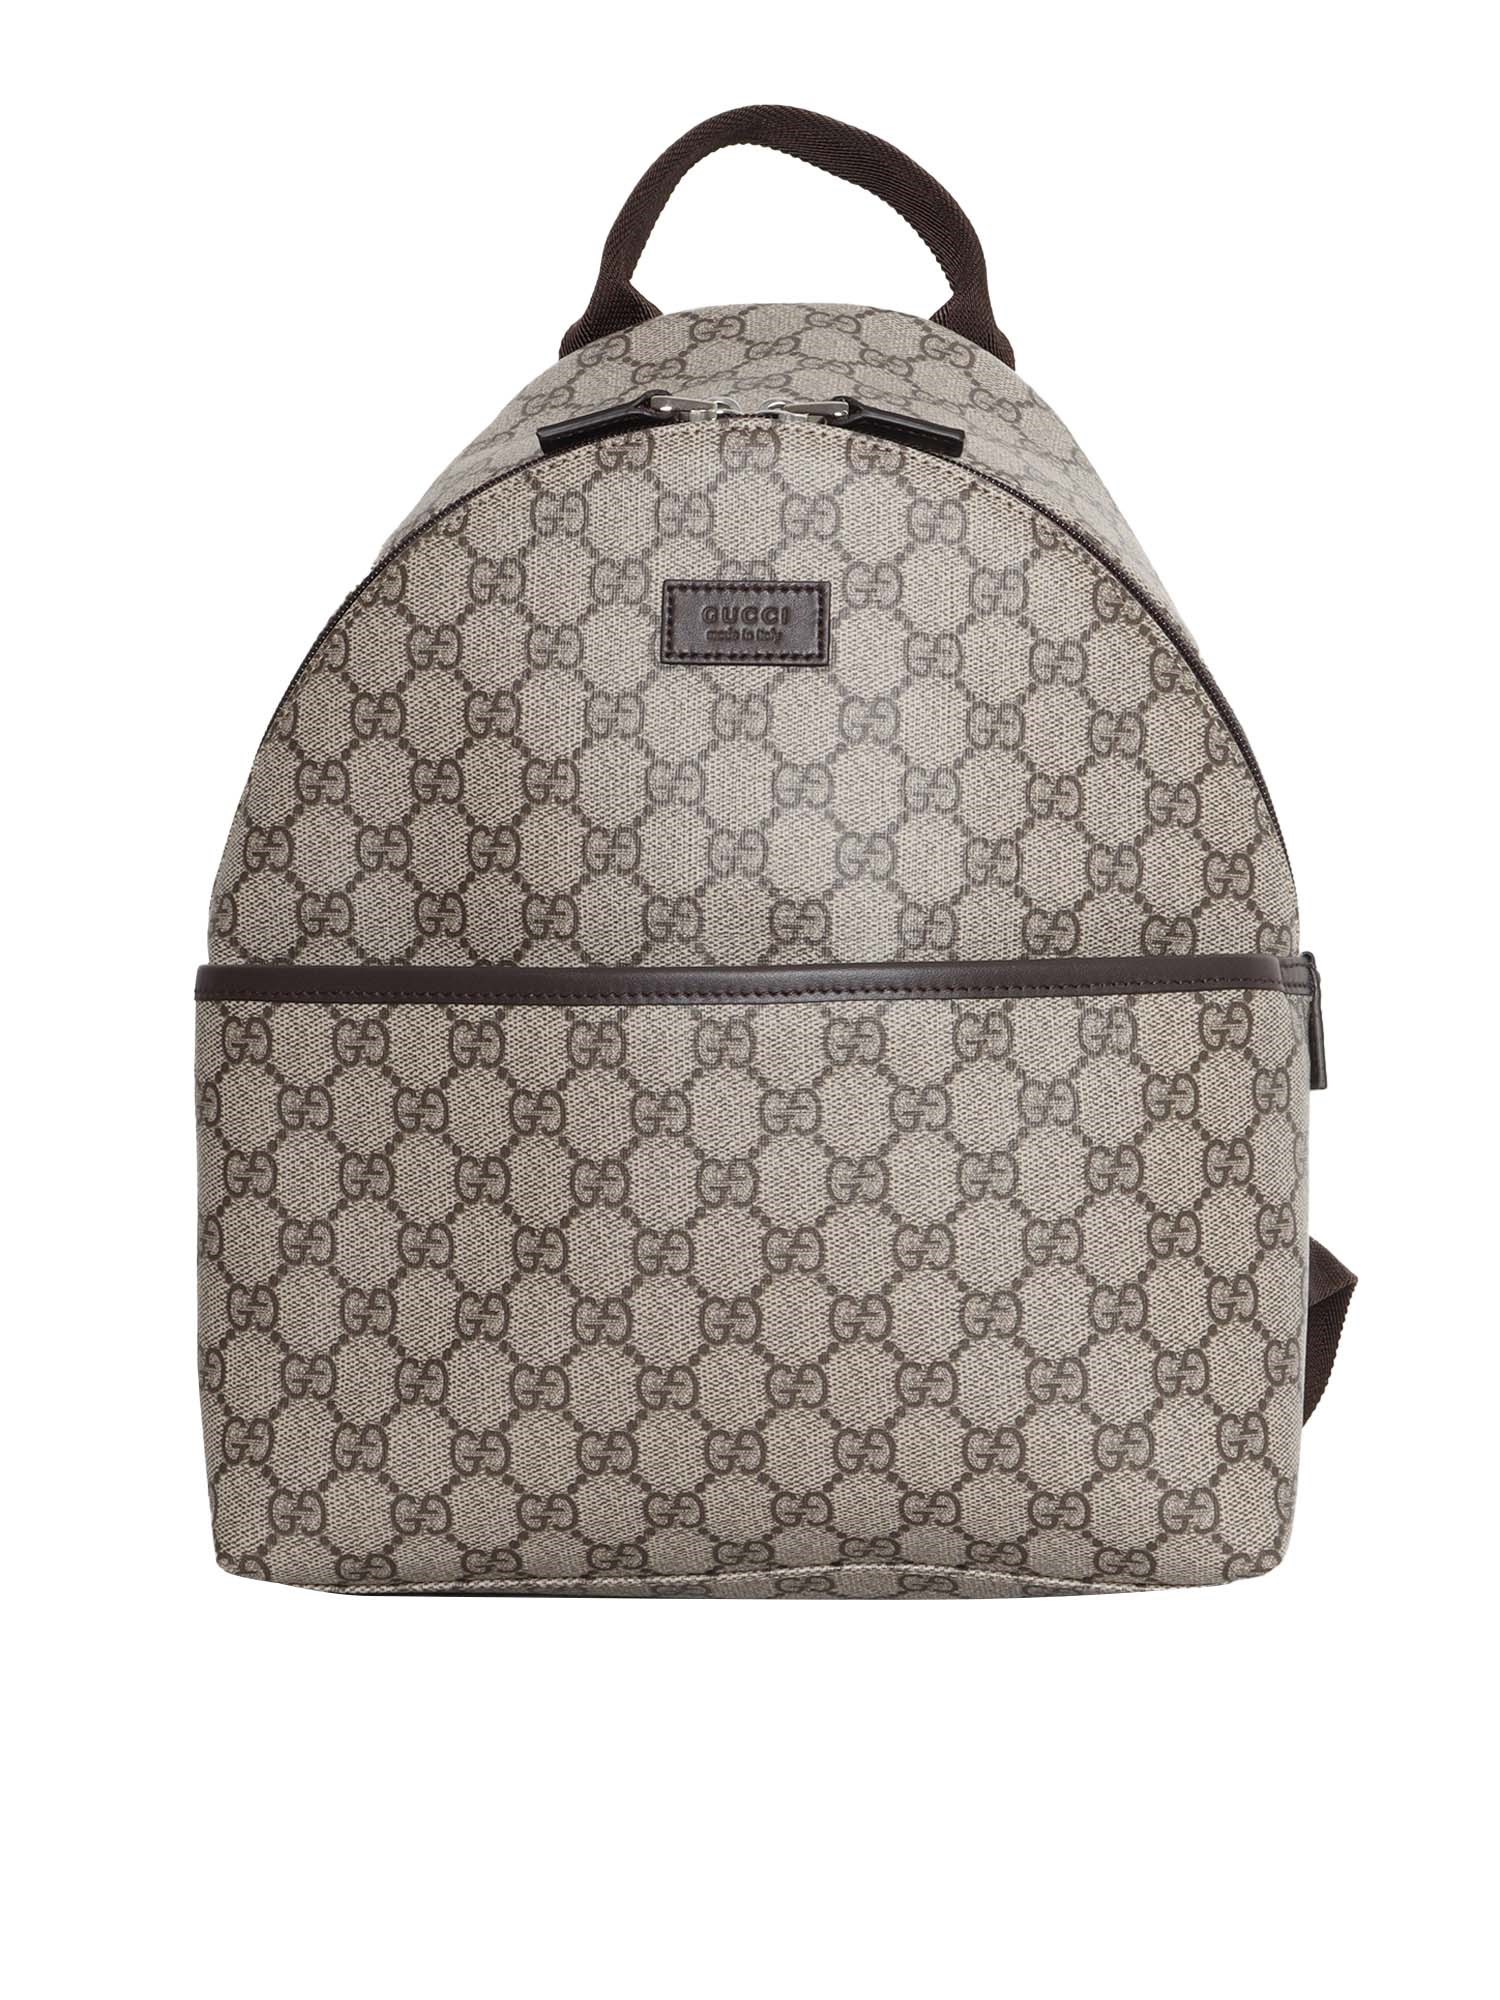 Gucci Gg Supreme Backpack In Brown